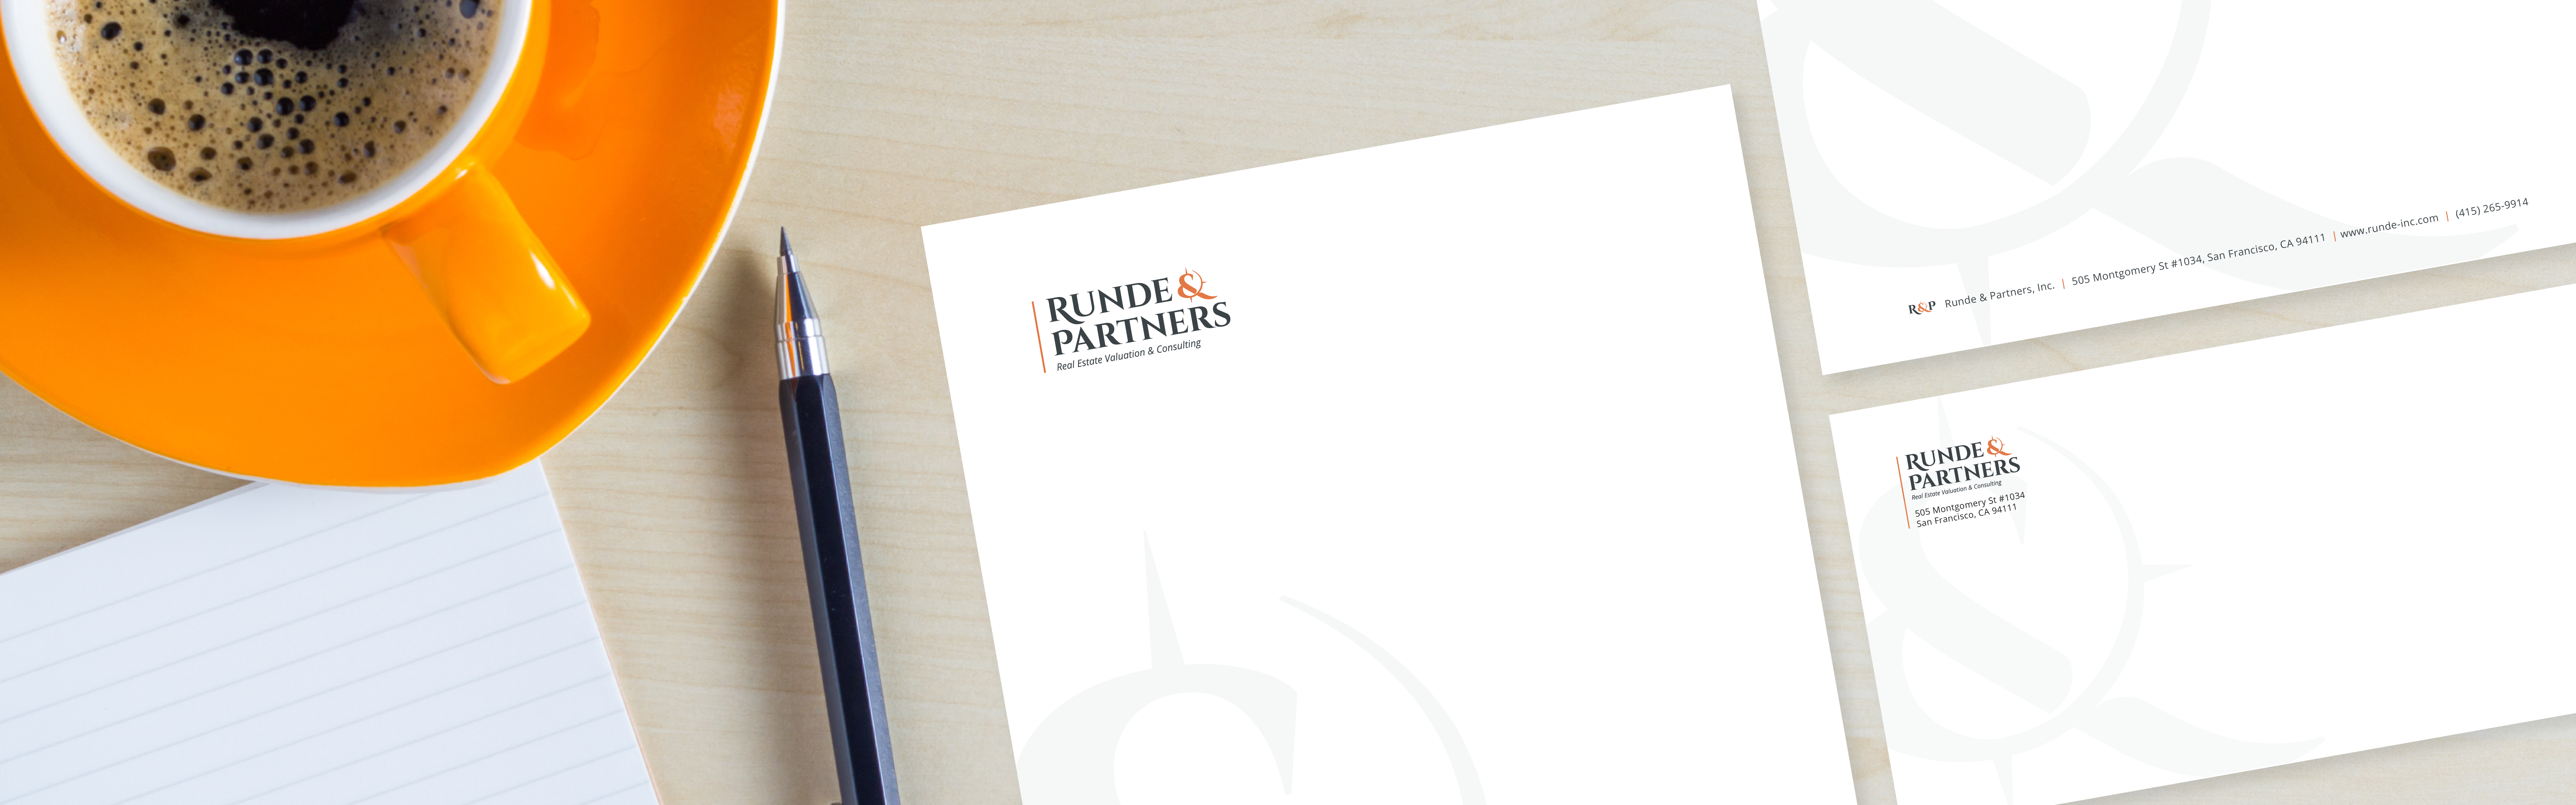 A desk setup featuring an orange coffee cup, a pen, a notepad, and letterheads for 'Runde & Partners'.